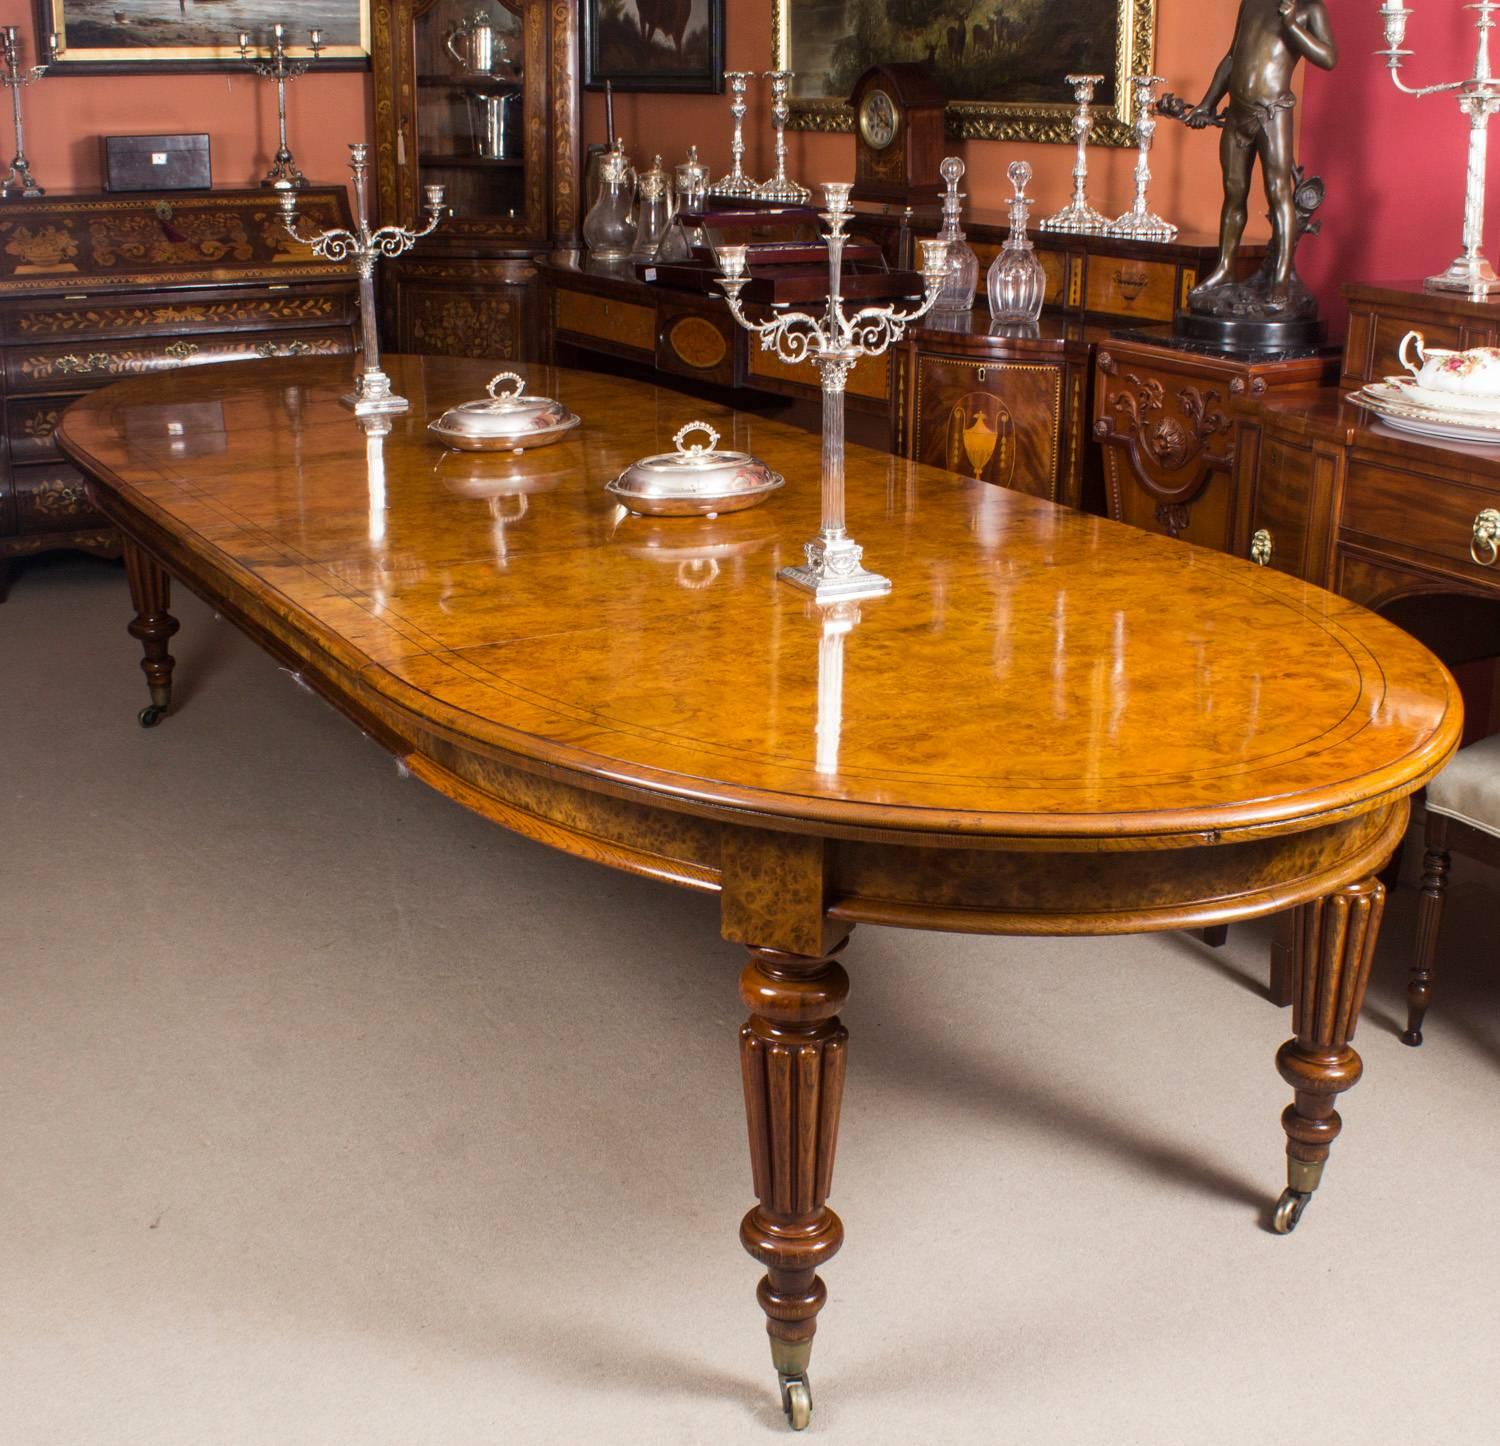 There is no mistaking the style and sophisticated design of this exquisite rare English antique Victorian pollard oak extending dining table, circa 1840 in date. This stunning dining table will stand out in your dining or conference room and will